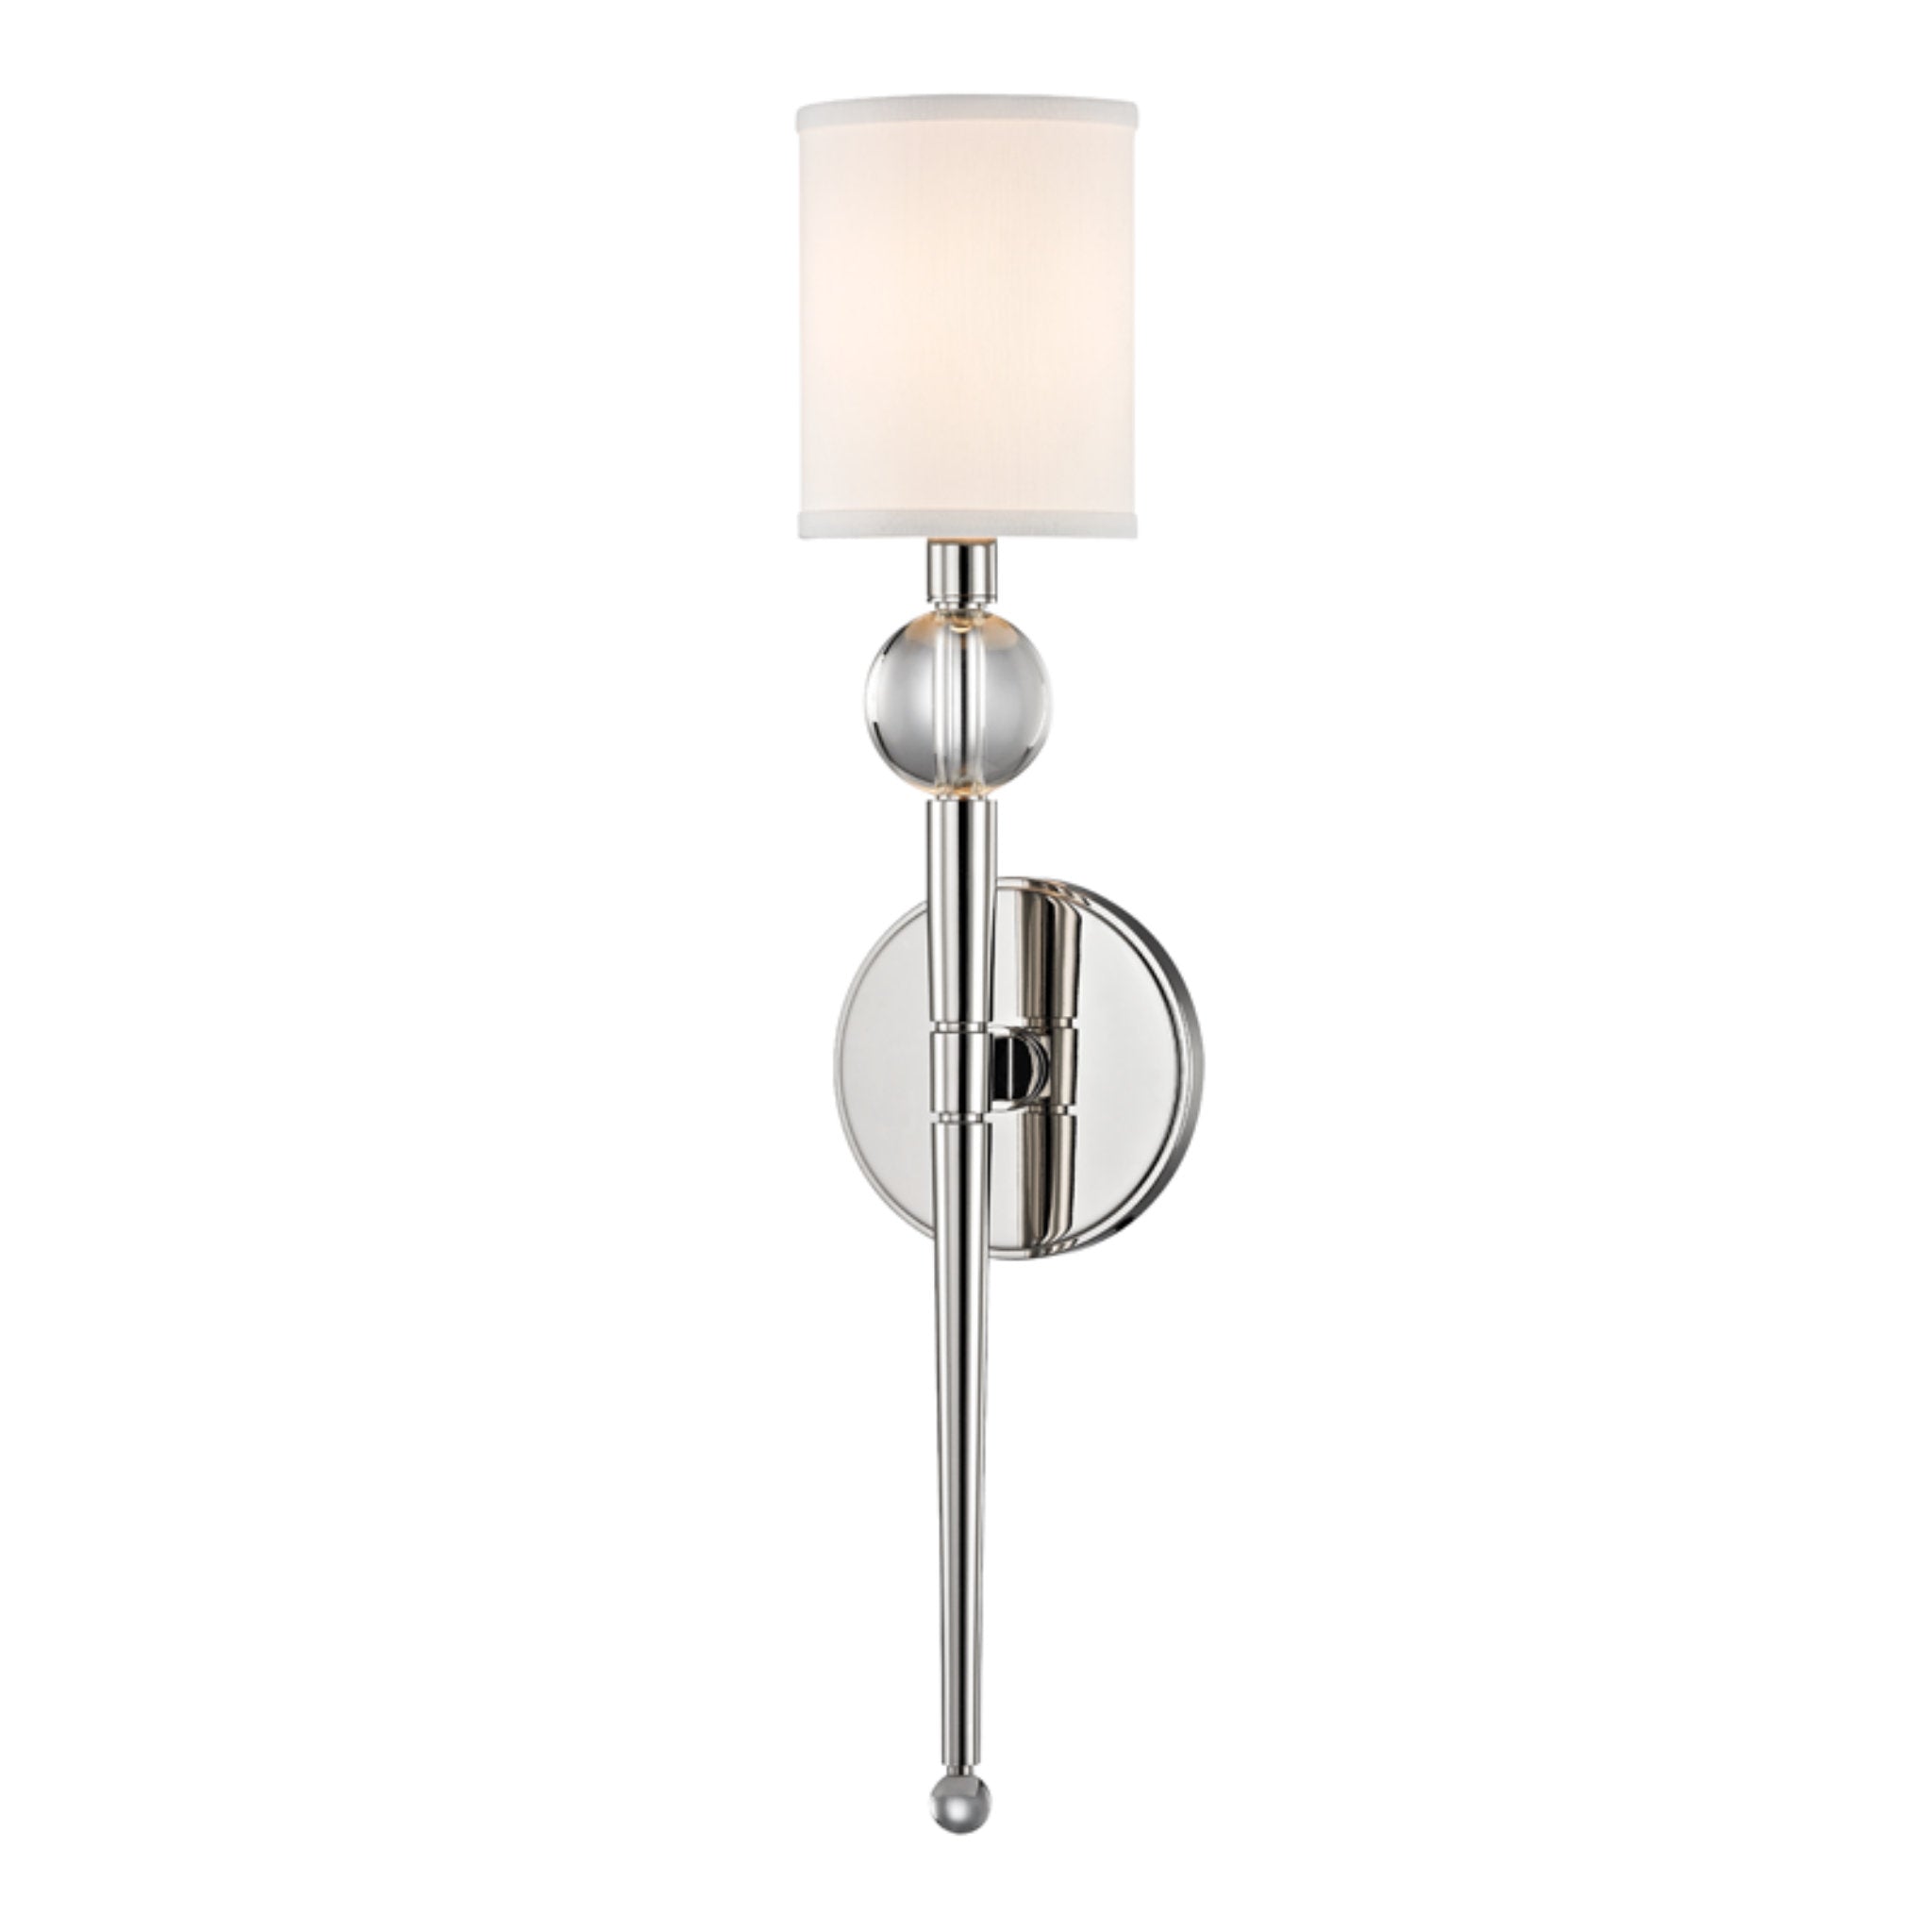 Rockland 1 Light Wall Sconce in Polished Nickel